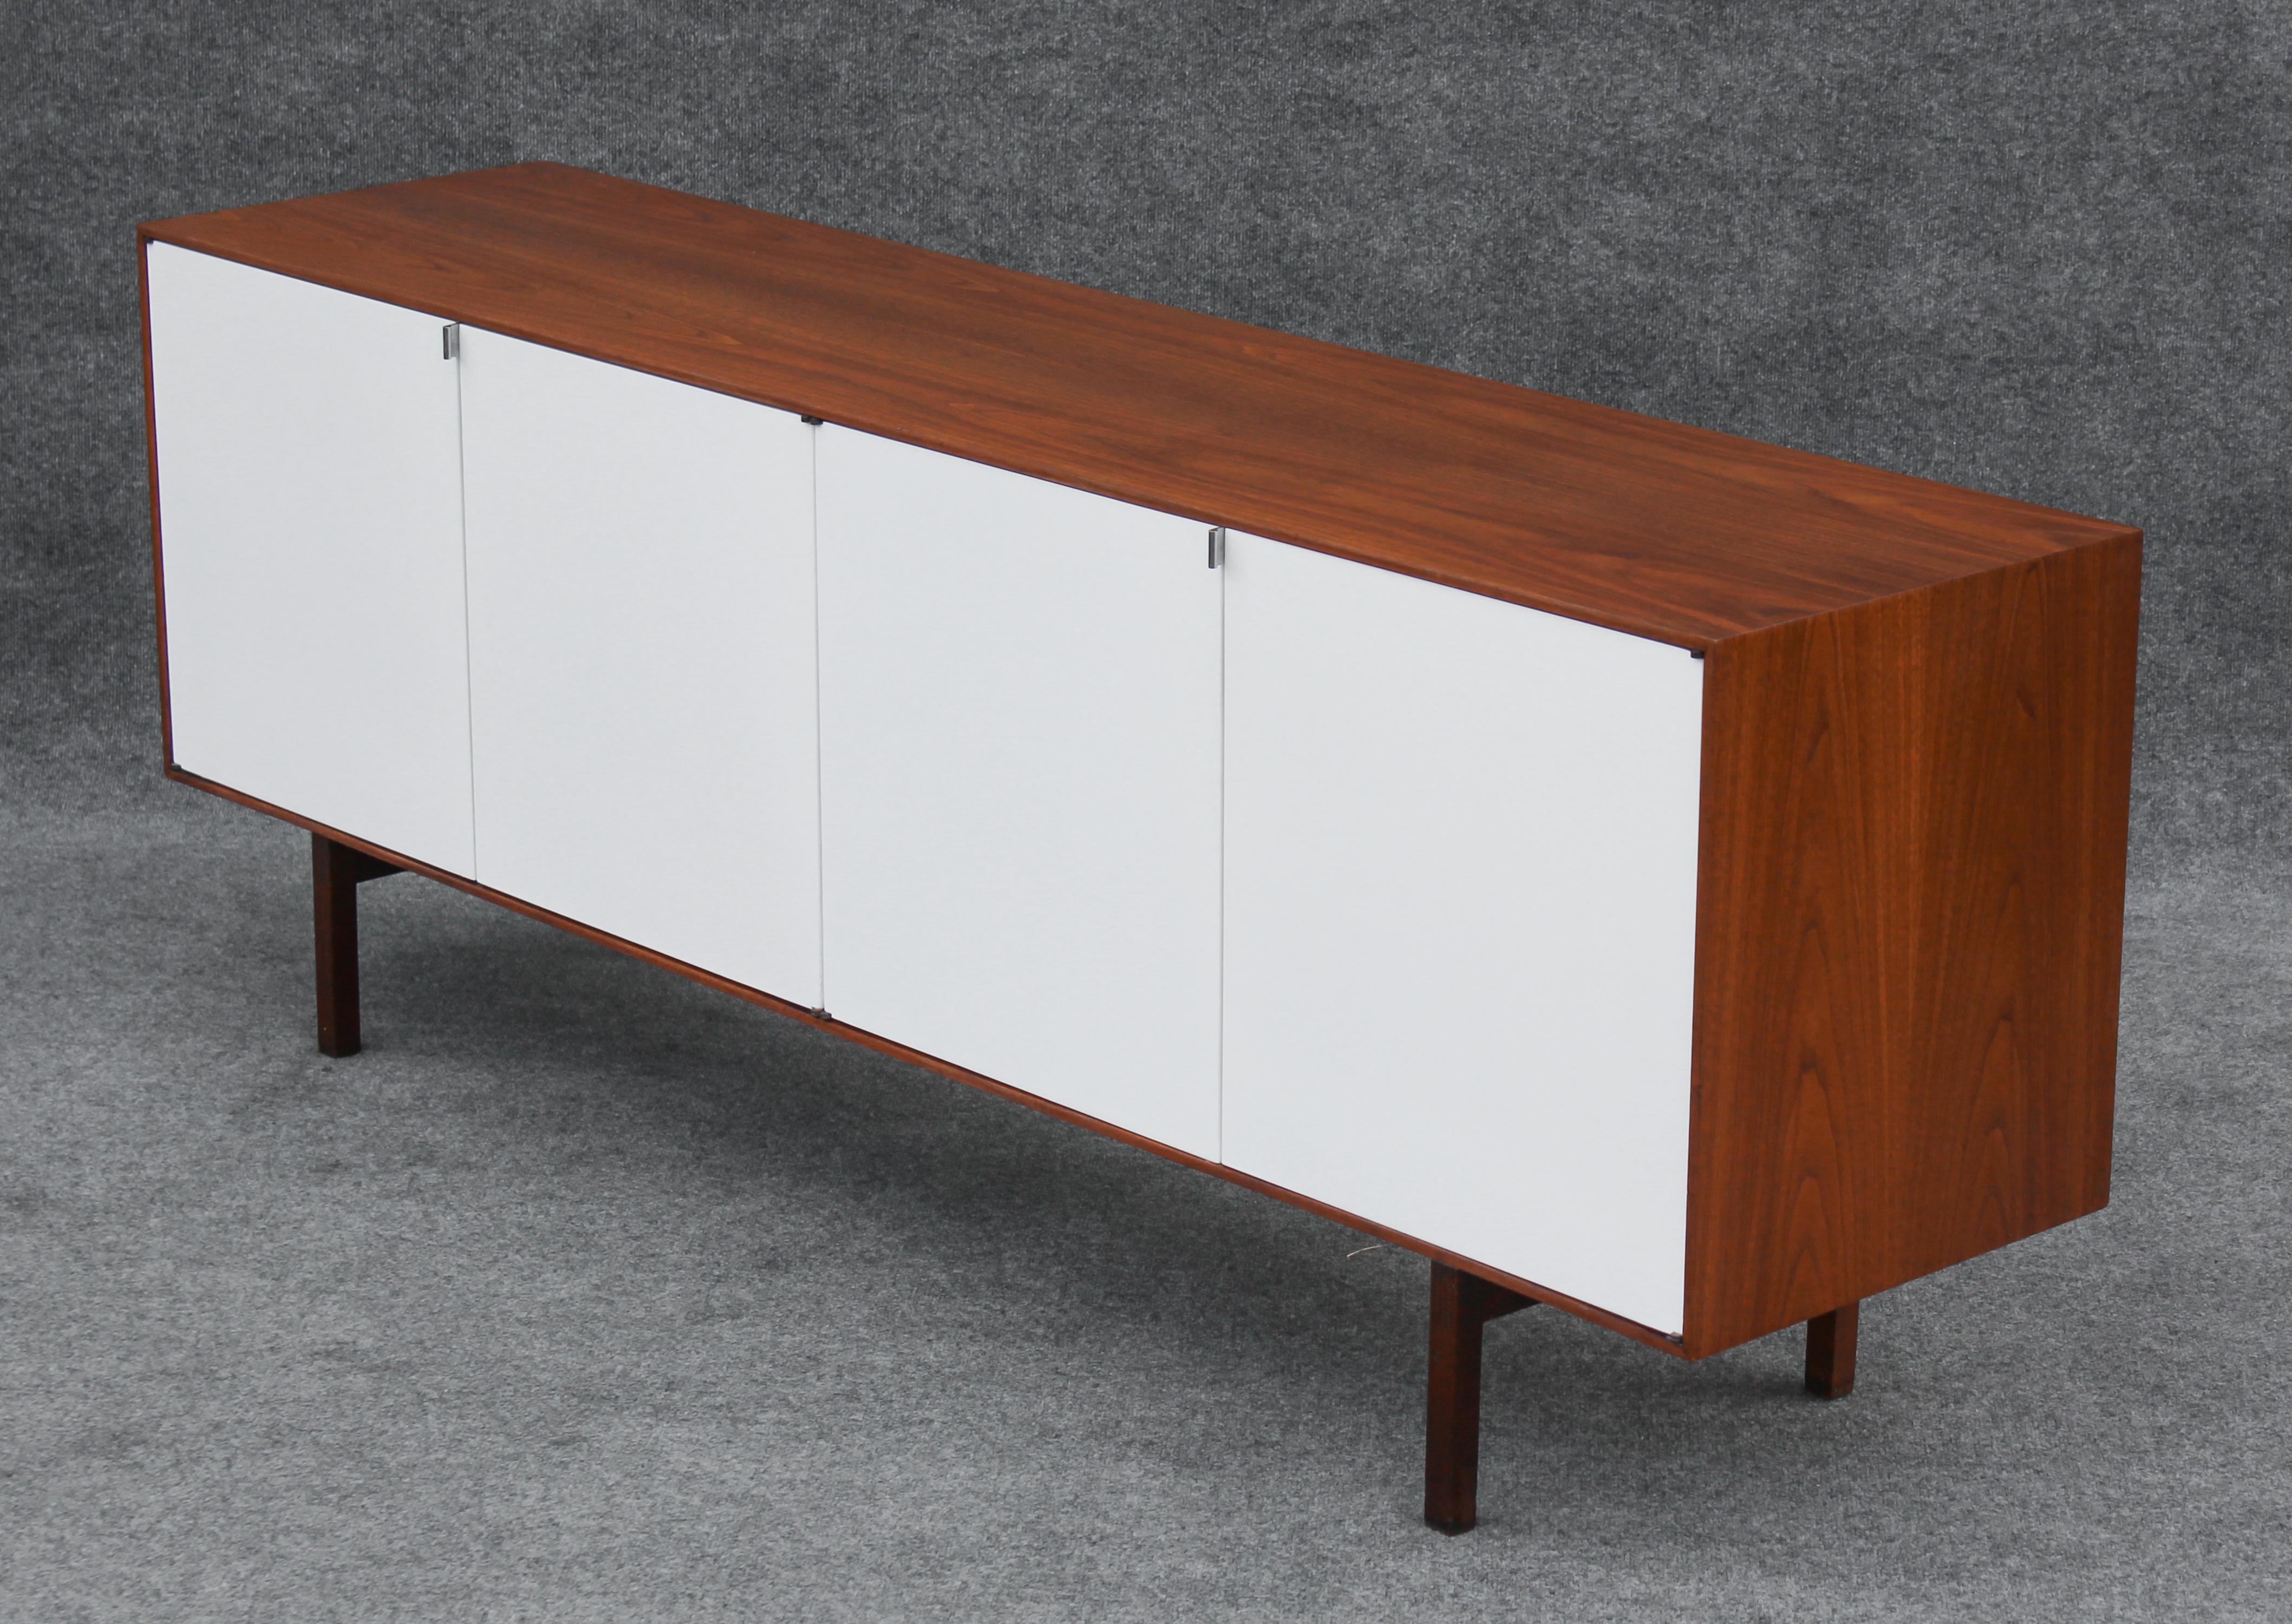 Metal Restored Florence Knoll Walnut & Maple Cabinet Model No.541 New York, 1960s For Sale